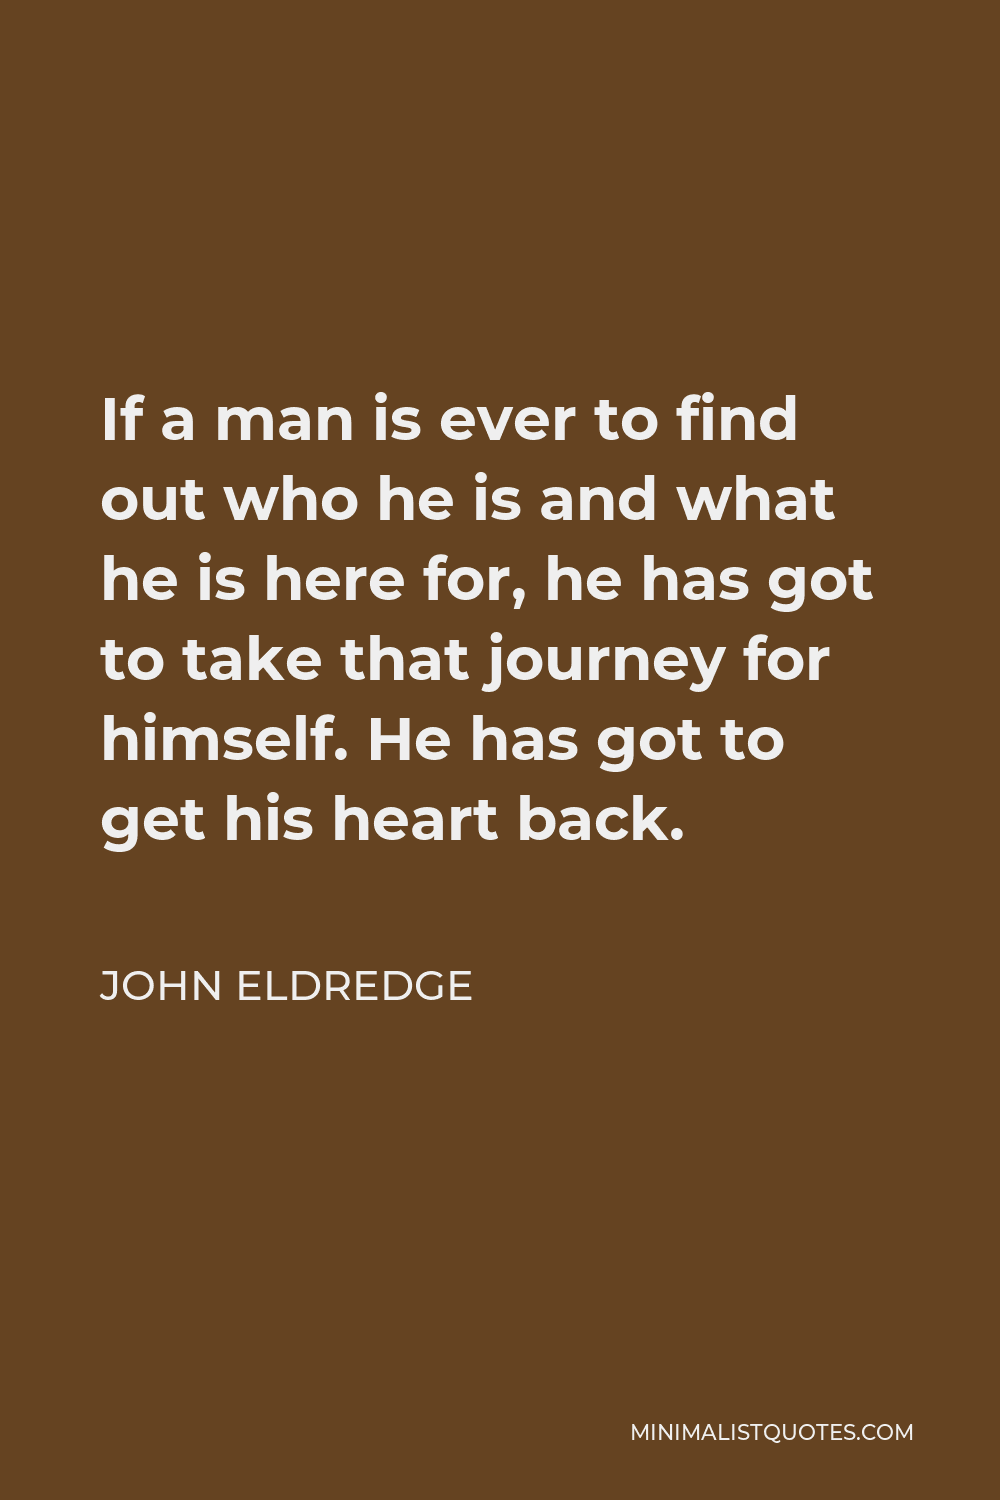 John Eldredge Quote: If a man is ever to find out who he is and